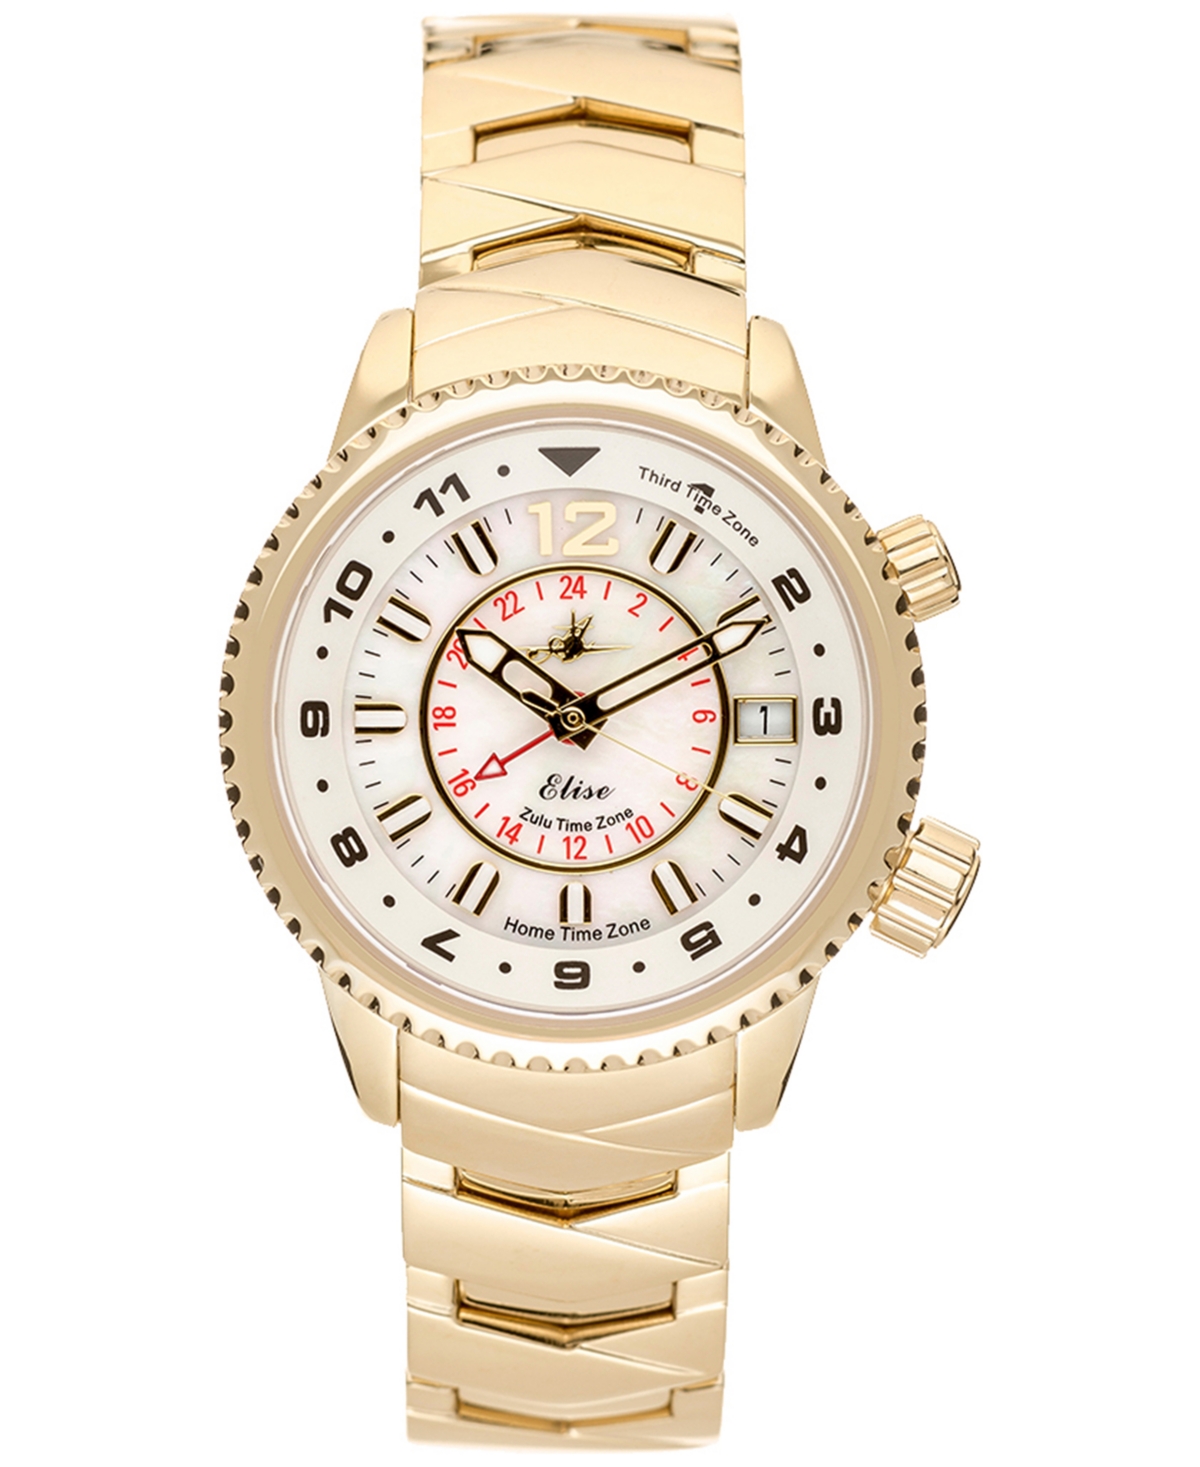 Women's Elise Swiss Tri-Time 28k Gold Ion-Plated Stainless Steel Bracelet Watch 33mm - Egyptian Gold